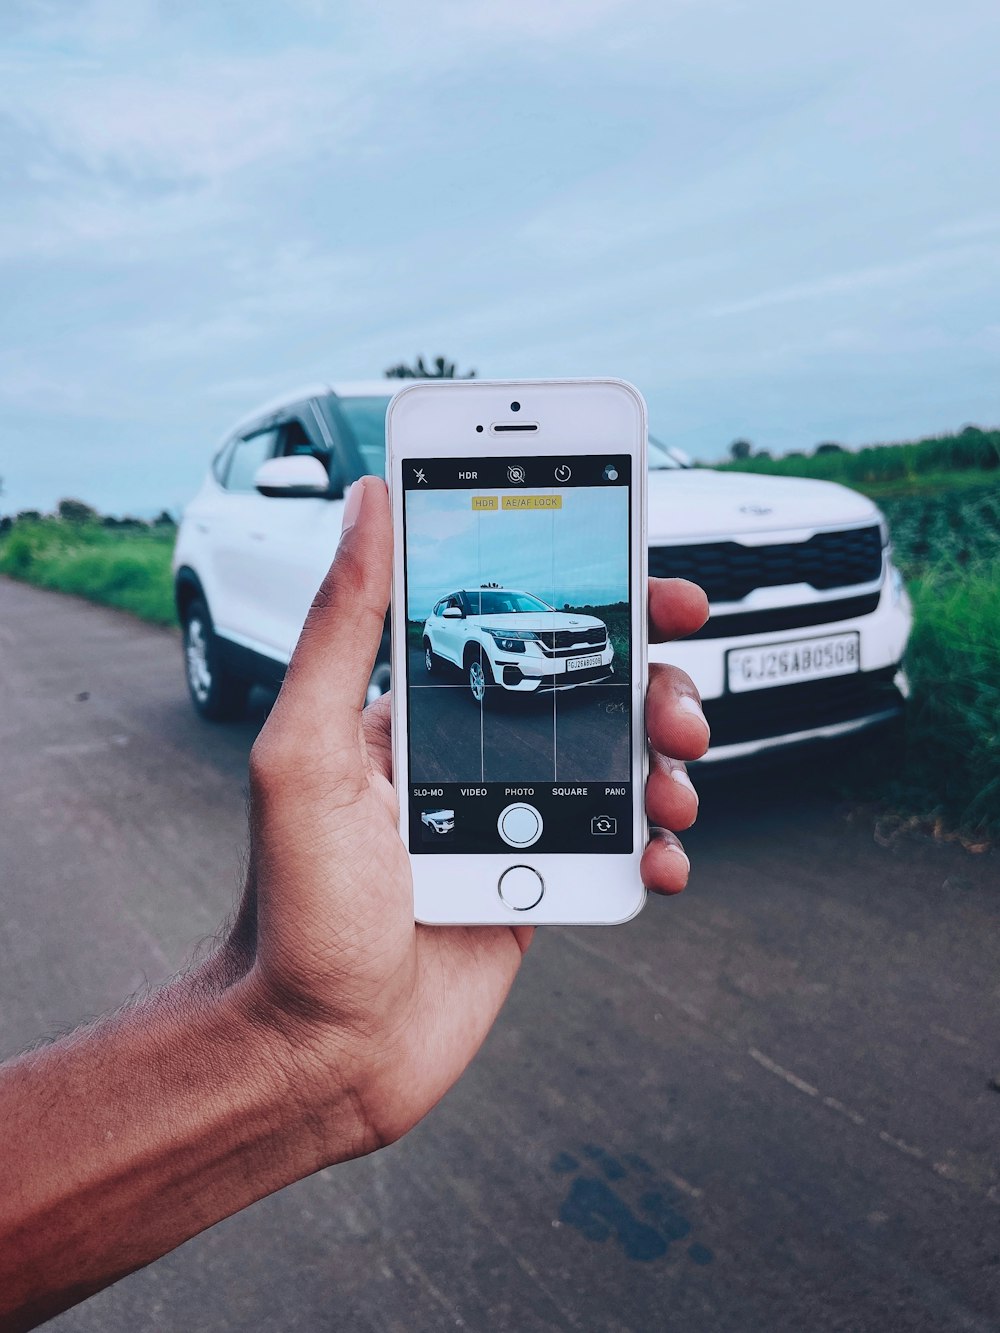 person holding silver iphone 6 taking photo of white car on road during daytime